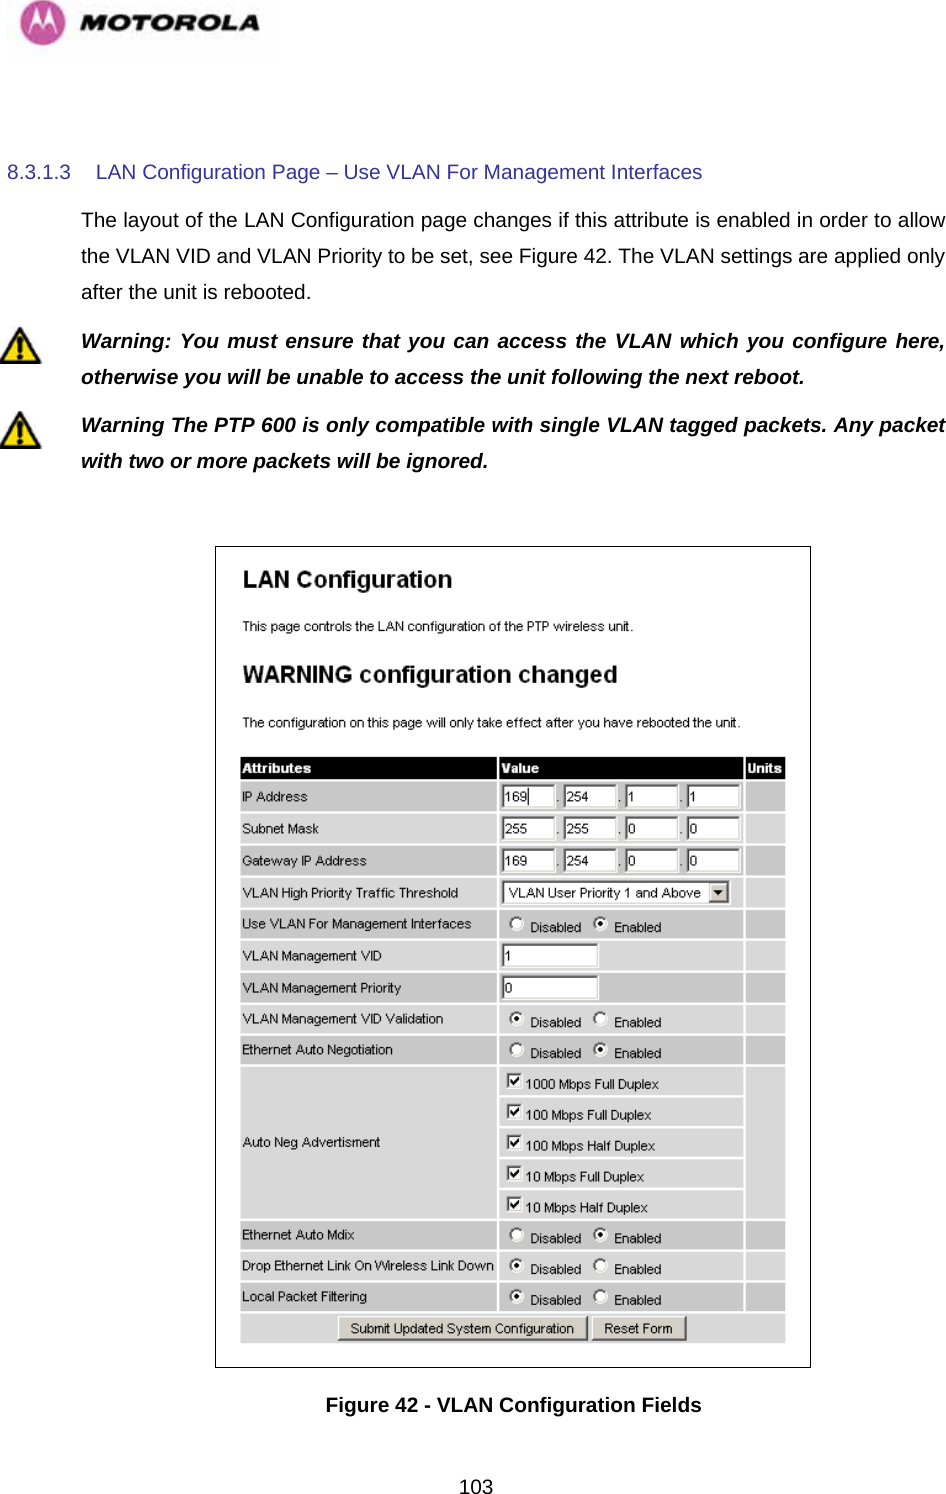   103 8.3.1.3 LAN Configuration Page – Use VLAN For Management Interfaces The layout of the LAN Configuration page changes if this attribute is enabled in order to allow the VLAN VID and VLAN Priority to be set, see Figure 42. The VLAN settings are applied only after the unit is rebooted. Warning: You must ensure that you can access the VLAN which you configure here, otherwise you will be unable to access the unit following the next reboot. Warning The PTP 600 is only compatible with single VLAN tagged packets. Any packet with two or more packets will be ignored.   Figure 42 - VLAN Configuration Fields 